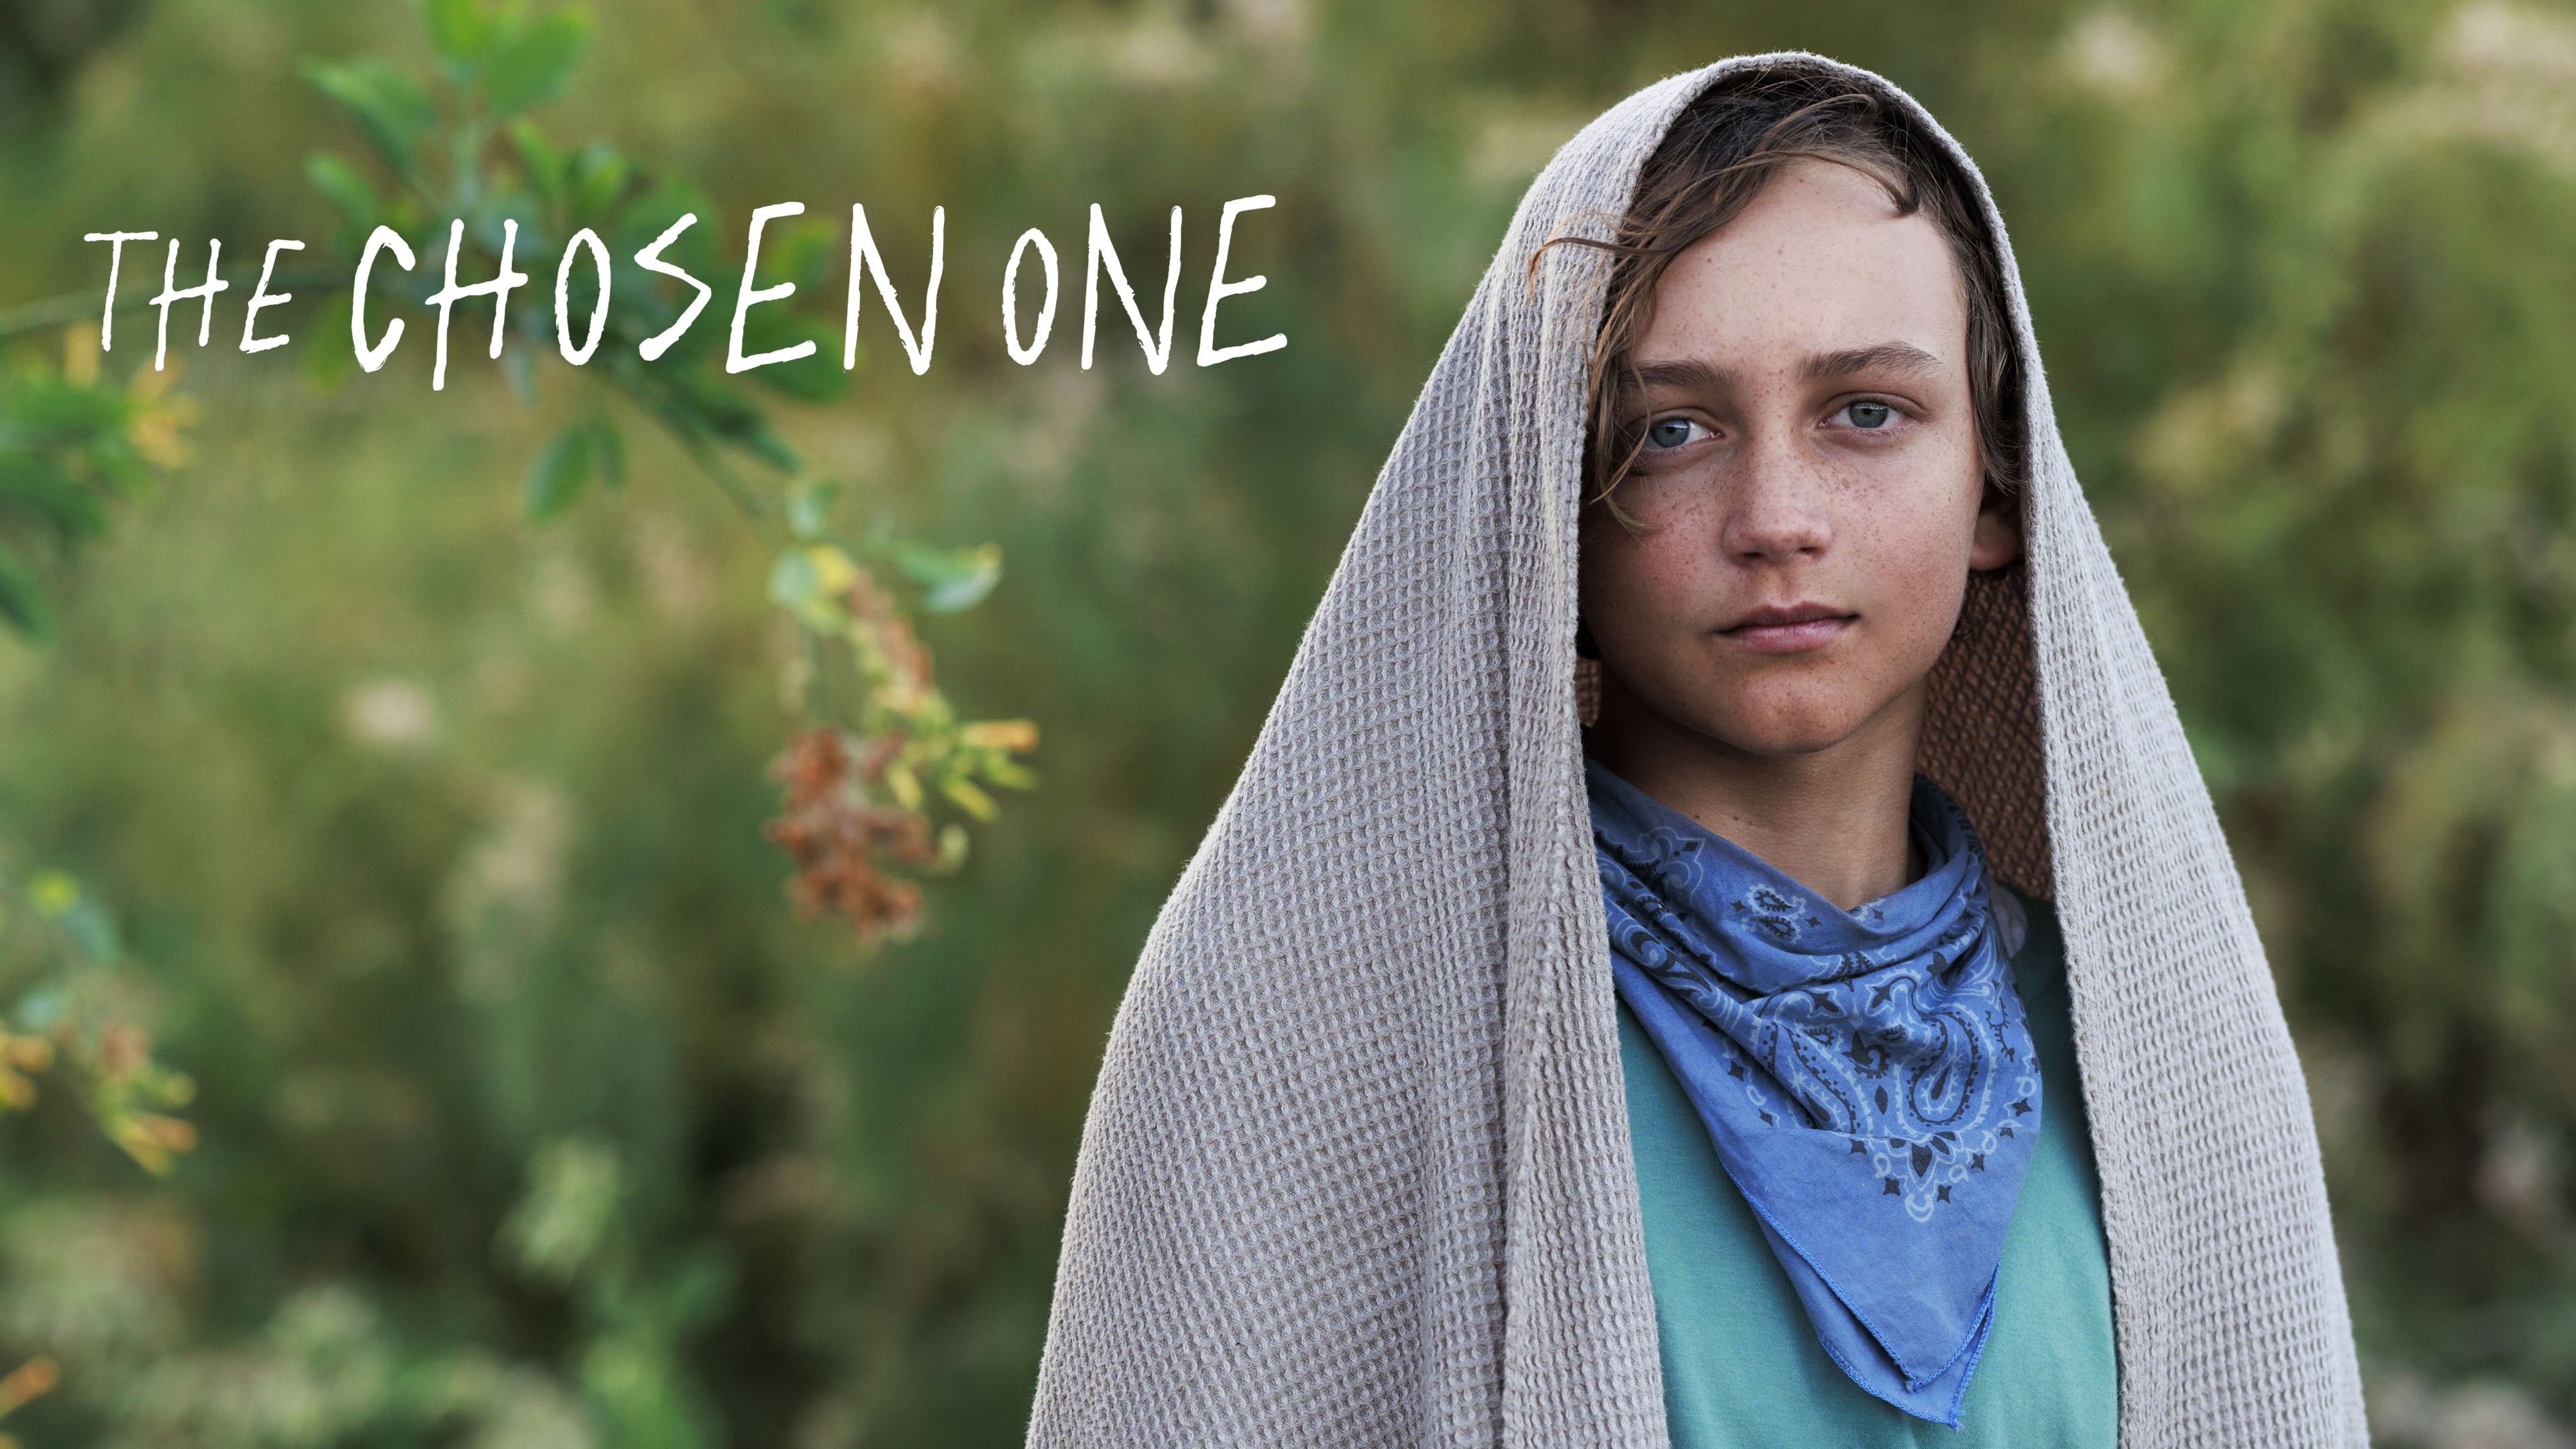 The Chosen Ones Full Movie Online Watch The Chosen Ones in Full HD Quality